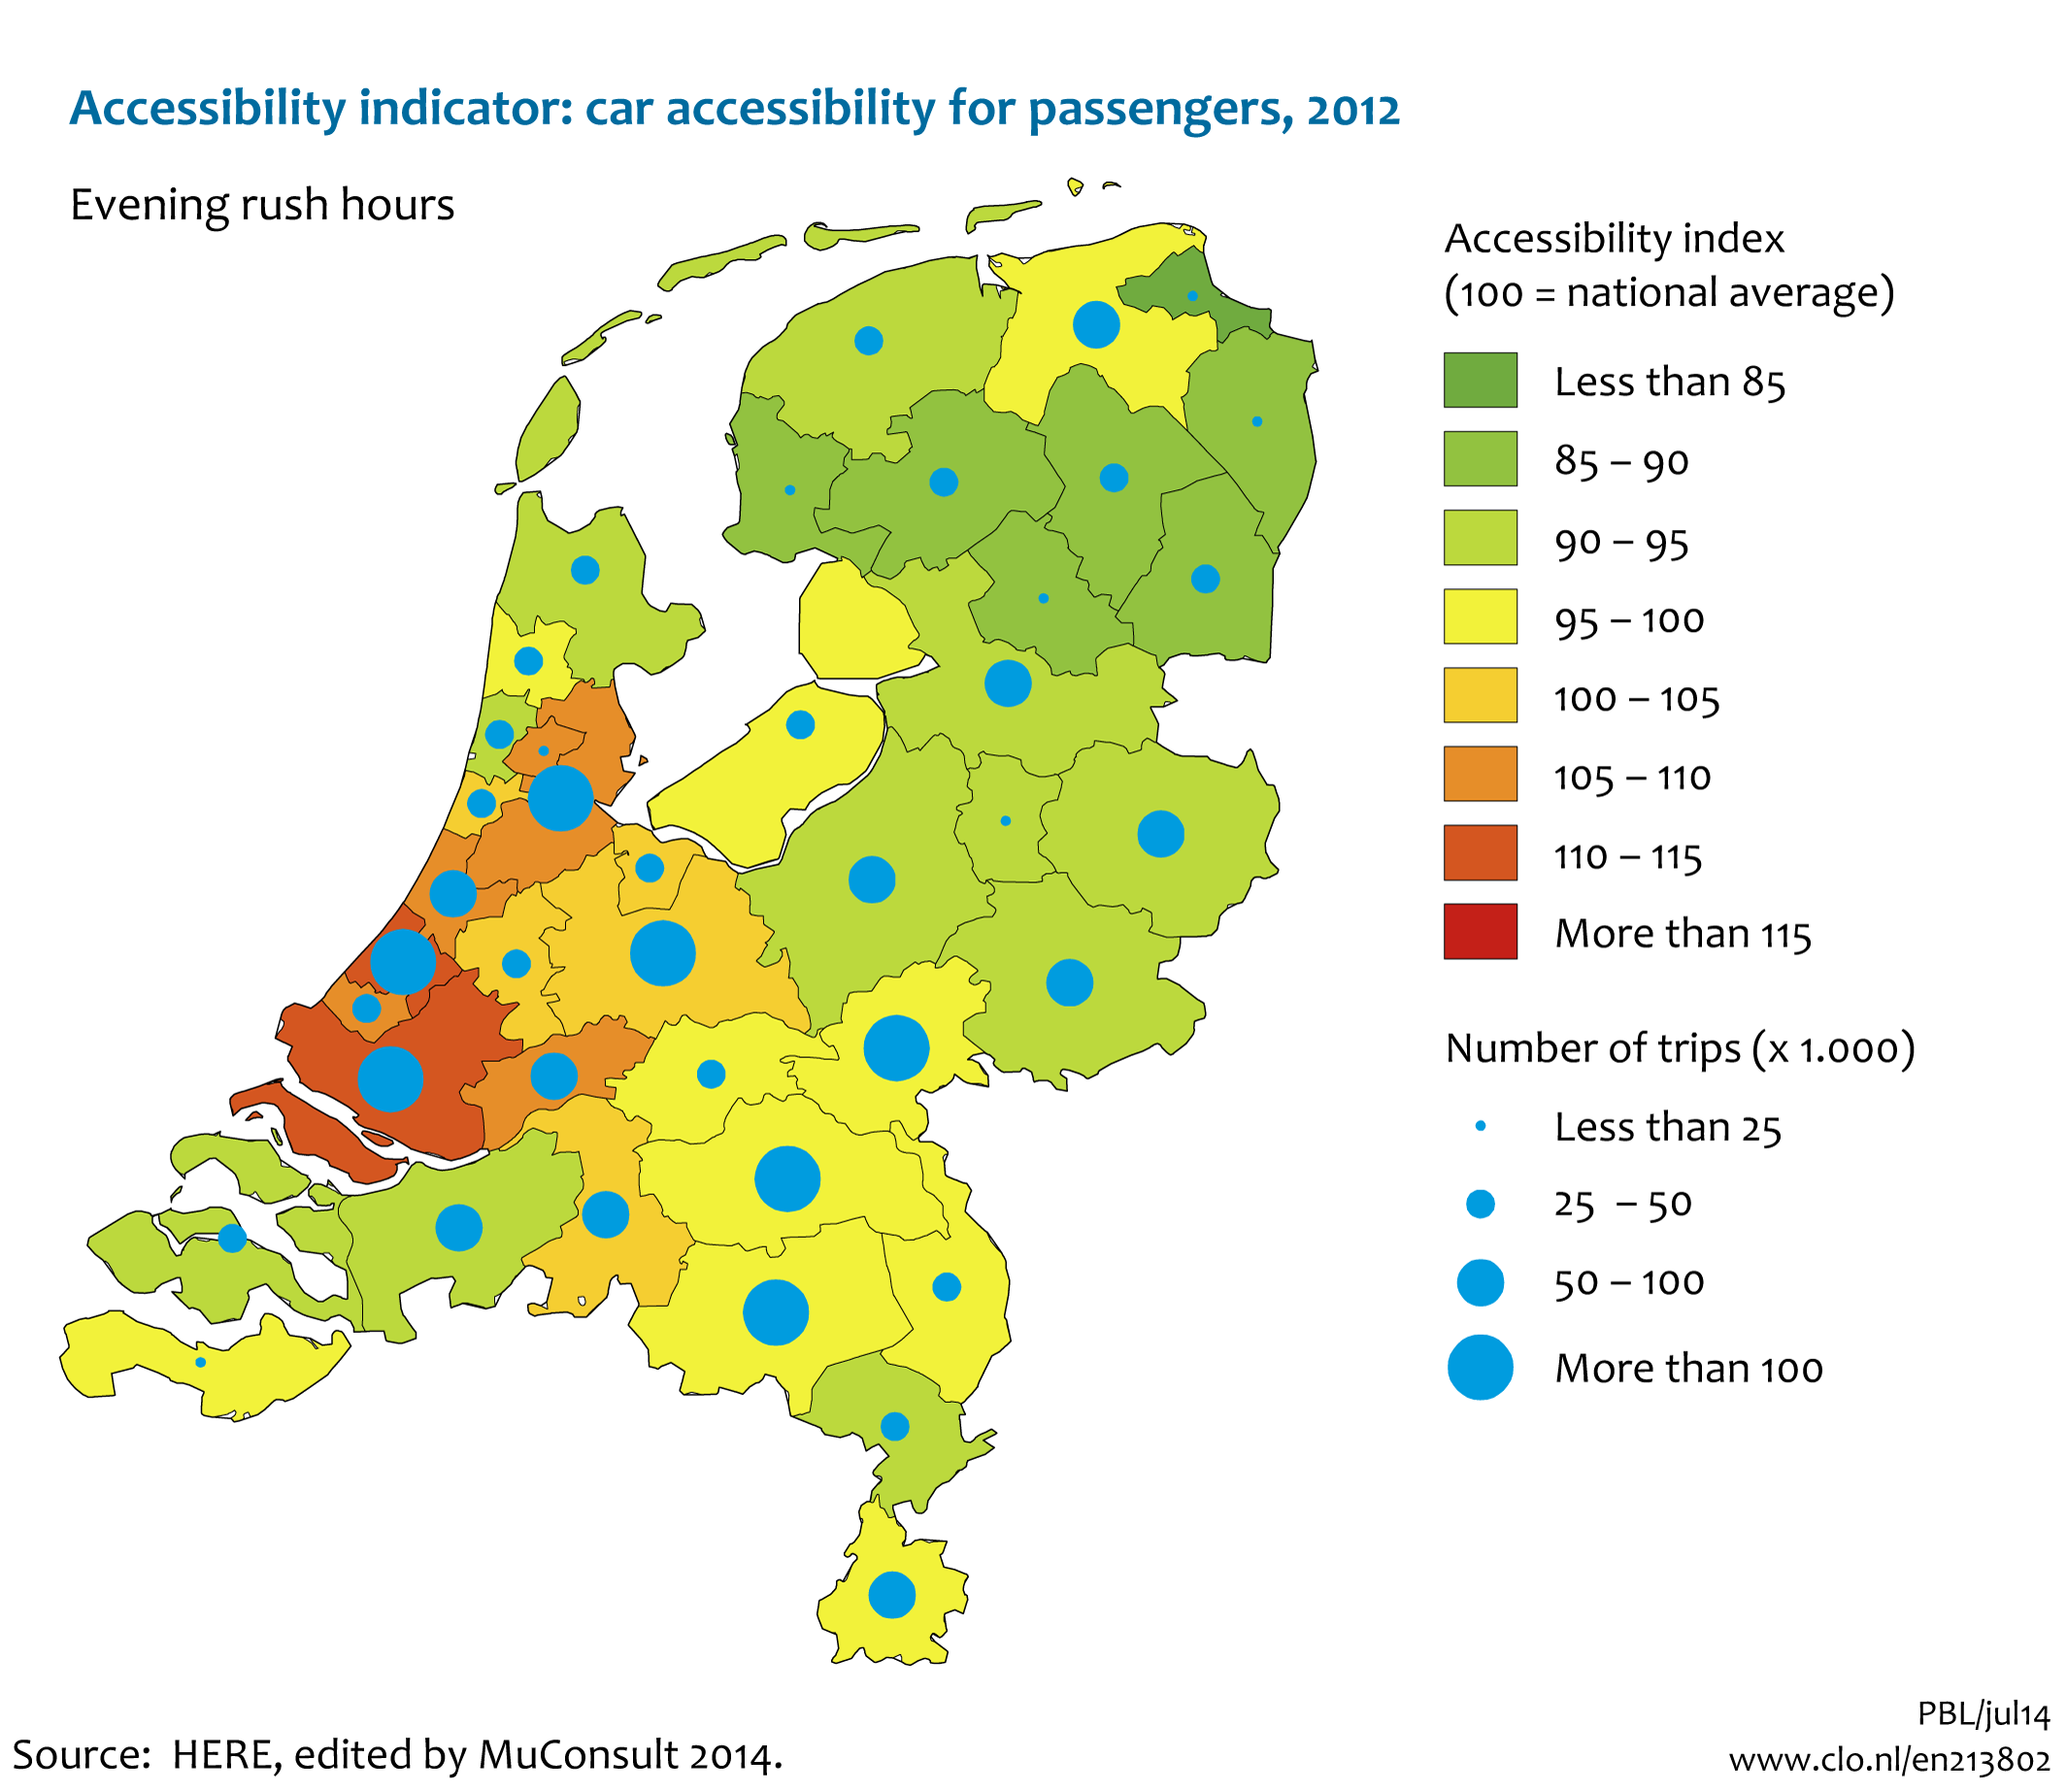 Image Accessibility indicator: car accessibility for passengers, 2012. The image is further explained in the text.